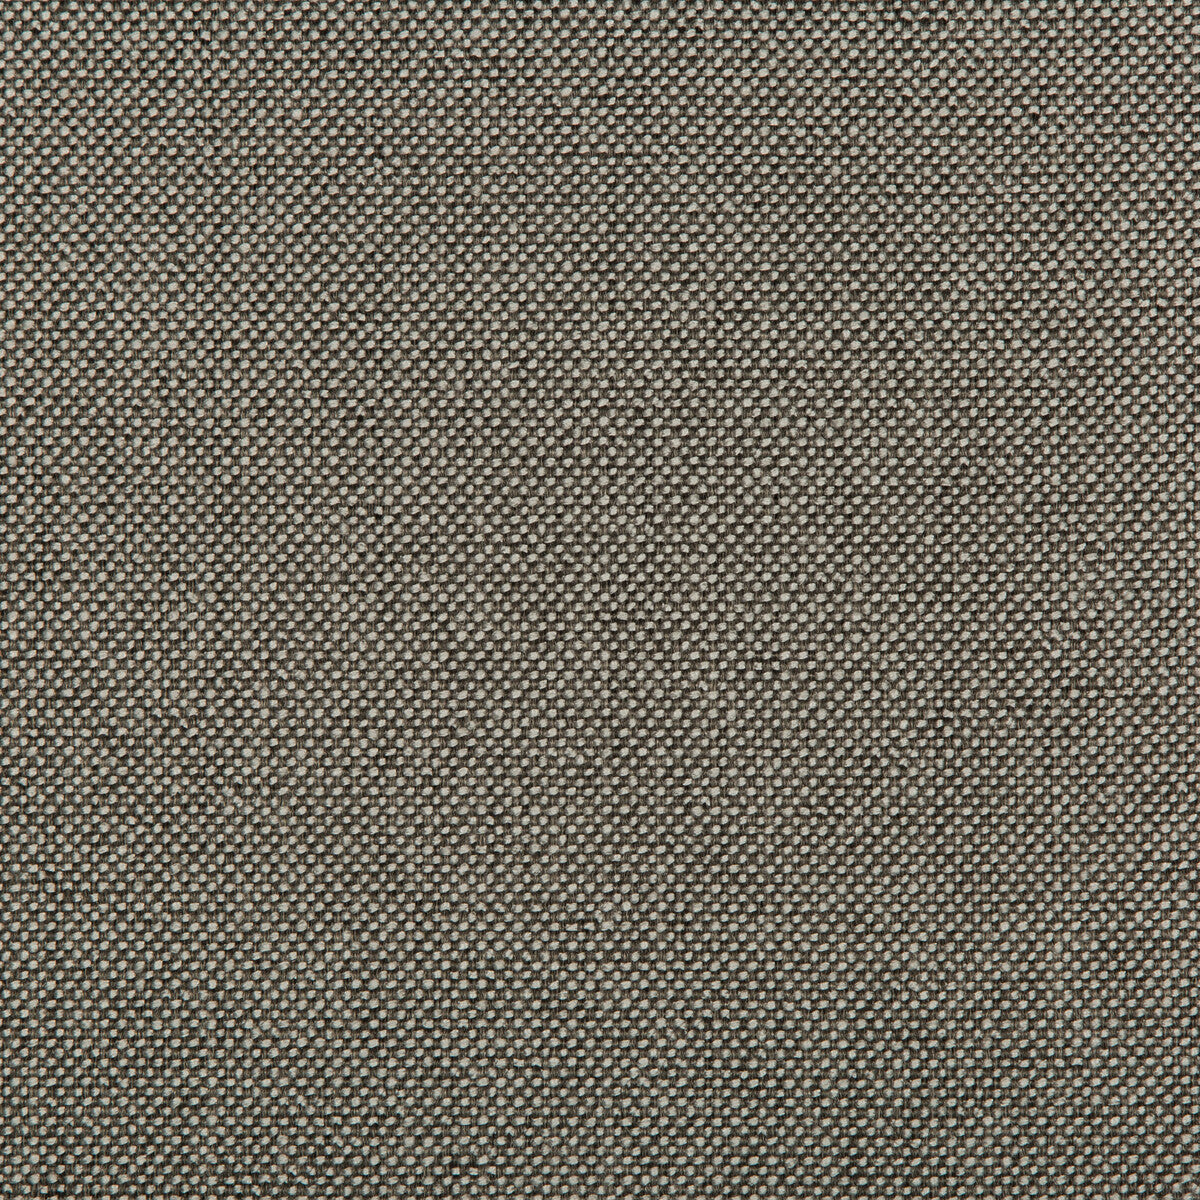 Williams fabric in nickel color - pattern 35744.21.0 - by Kravet Contract in the Value Kravetarmor collection